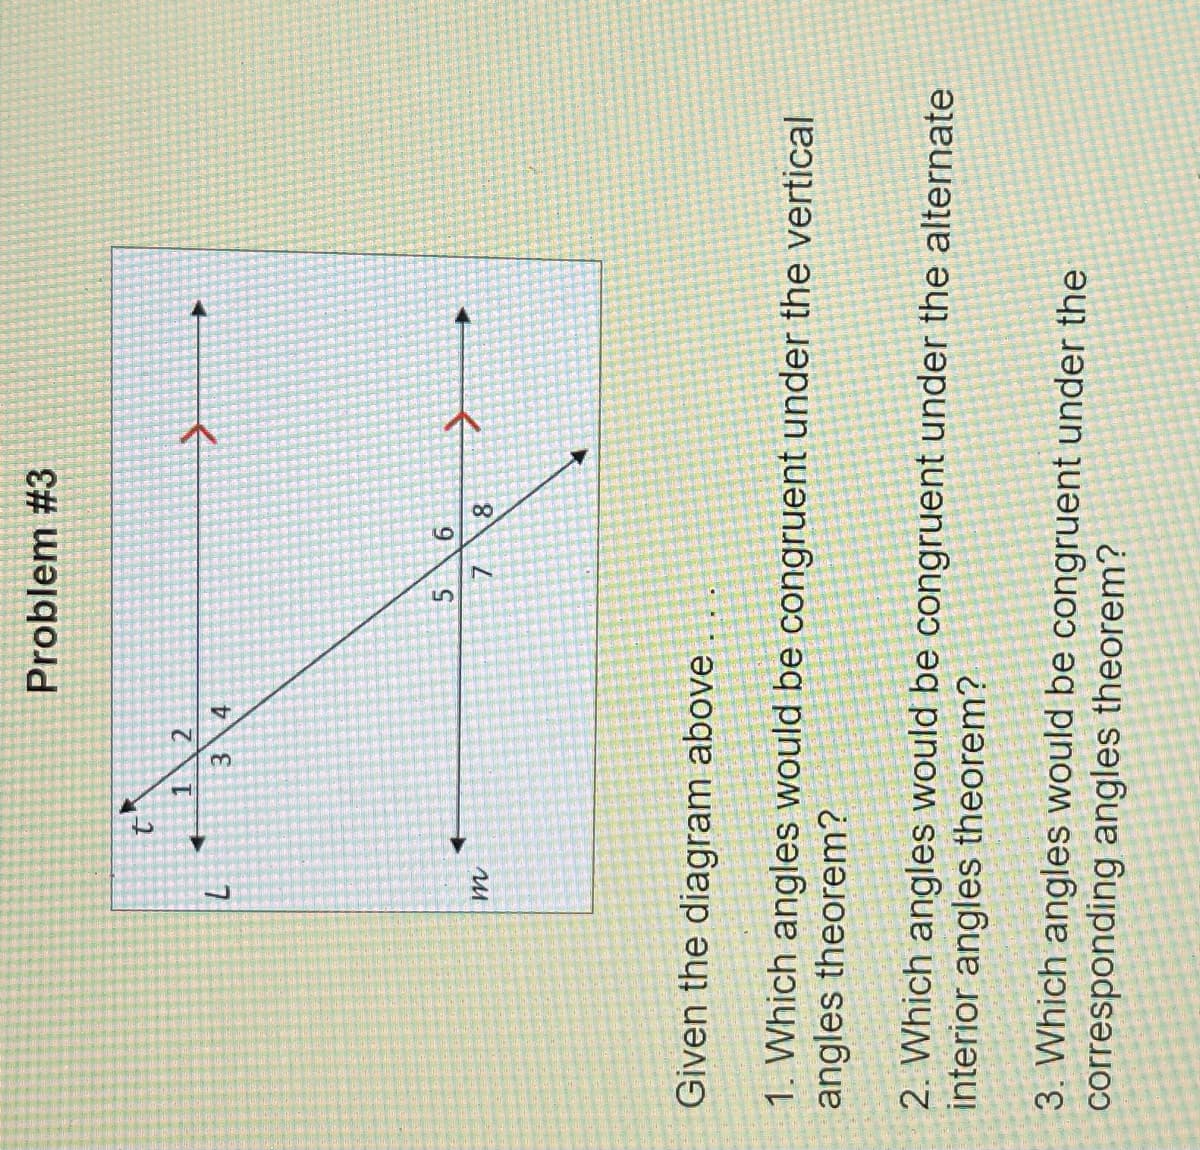 8.
6.
Problem #3
2.
1.
3.
4.
5.
7.
Given the diagram above
1. Which angles would be congruent under the vertical
angles theorem?
2. Which angles would be congruent under the alternate
interior angles theorem?
3. Which angles would be congruent under the
corresponding angles theorem?
